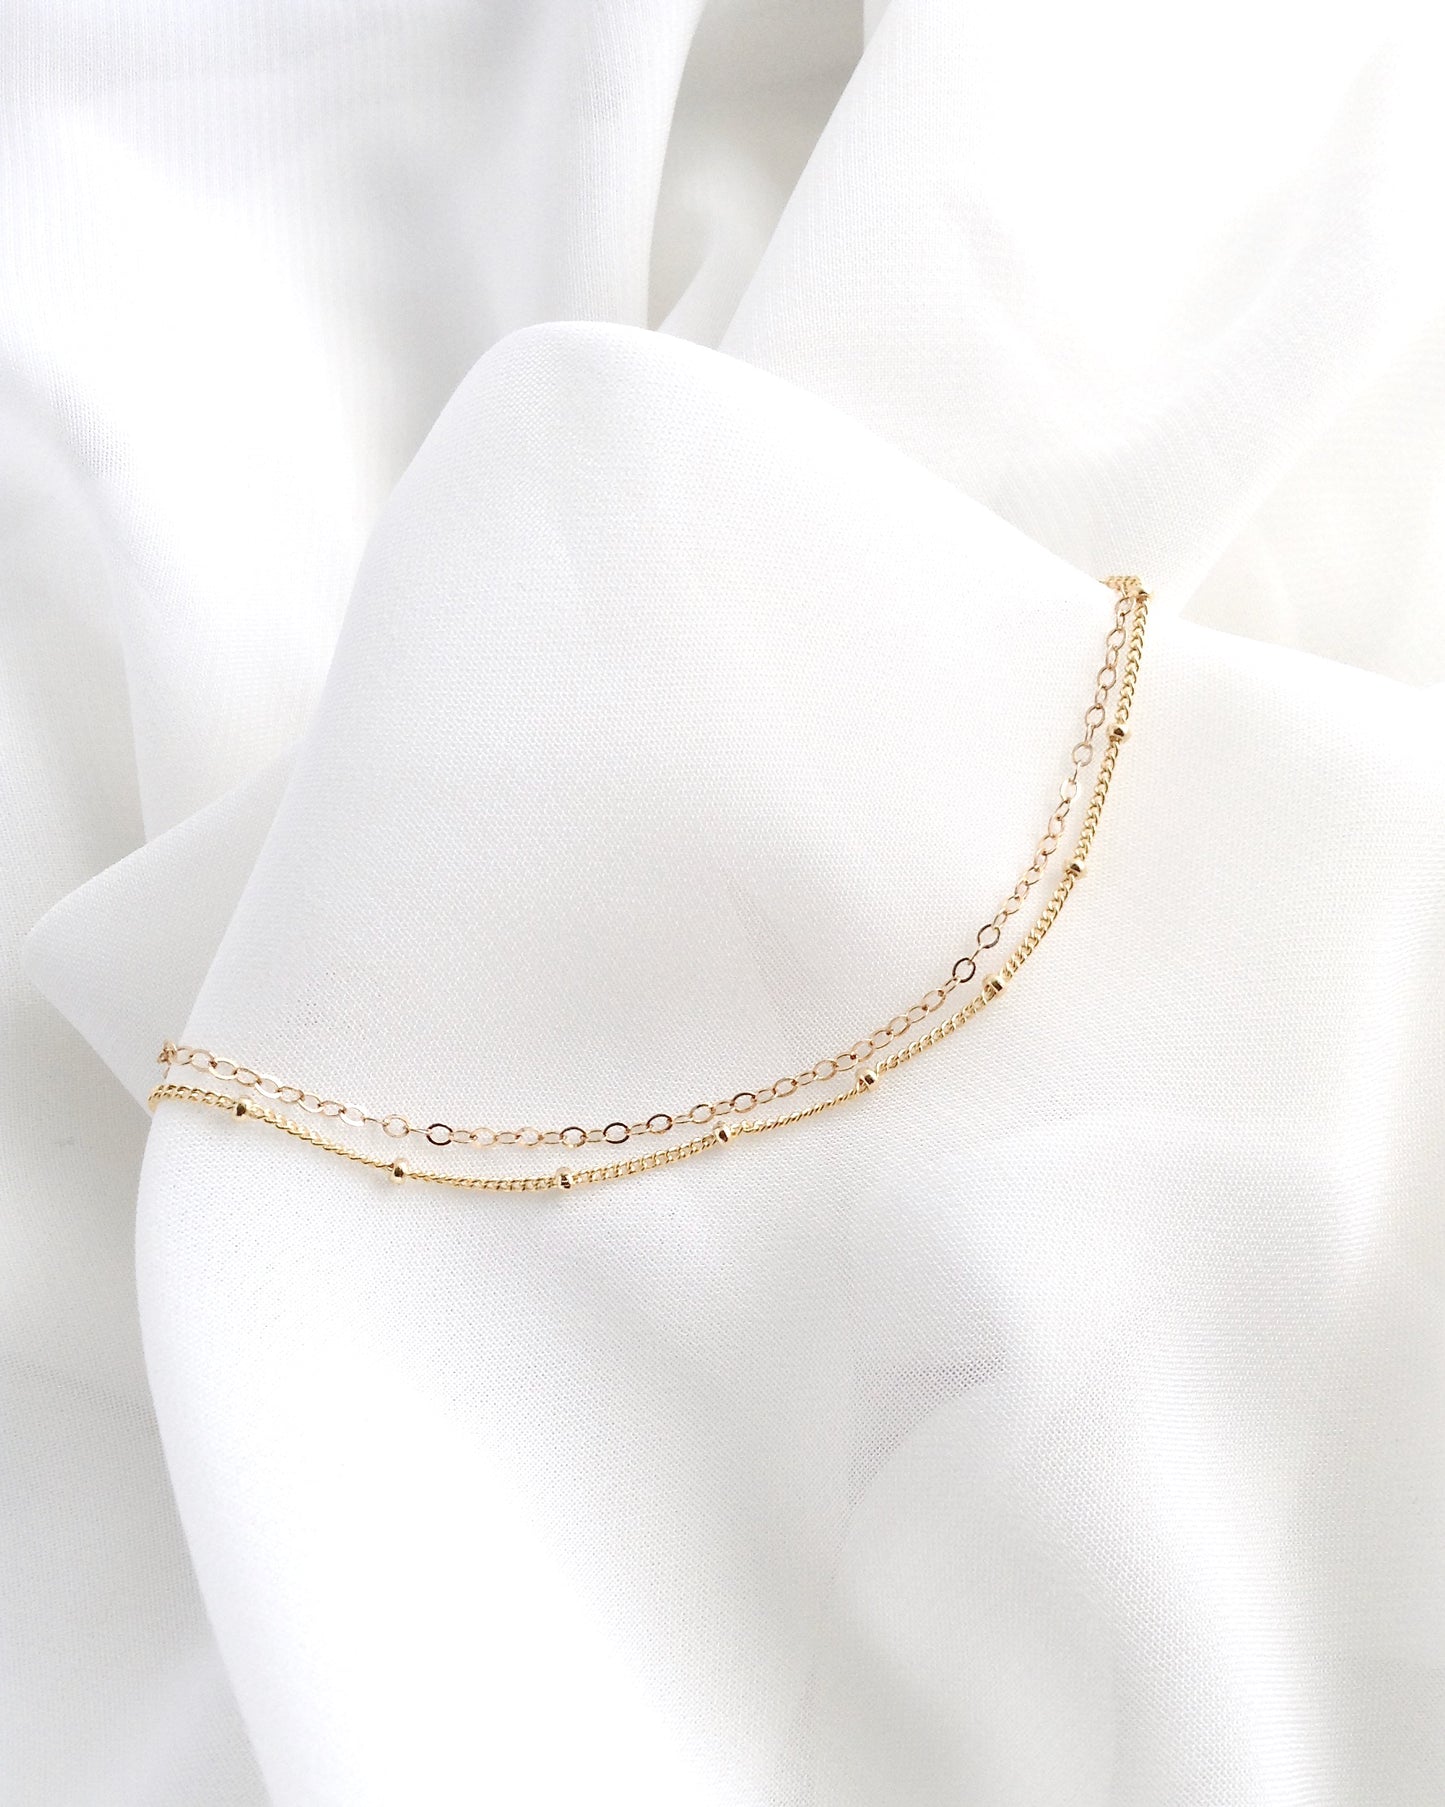 Simple Dainty Double Layer Anklet | Delicate Anklet in Gold Filled or Sterling Silver | IB Jewelry